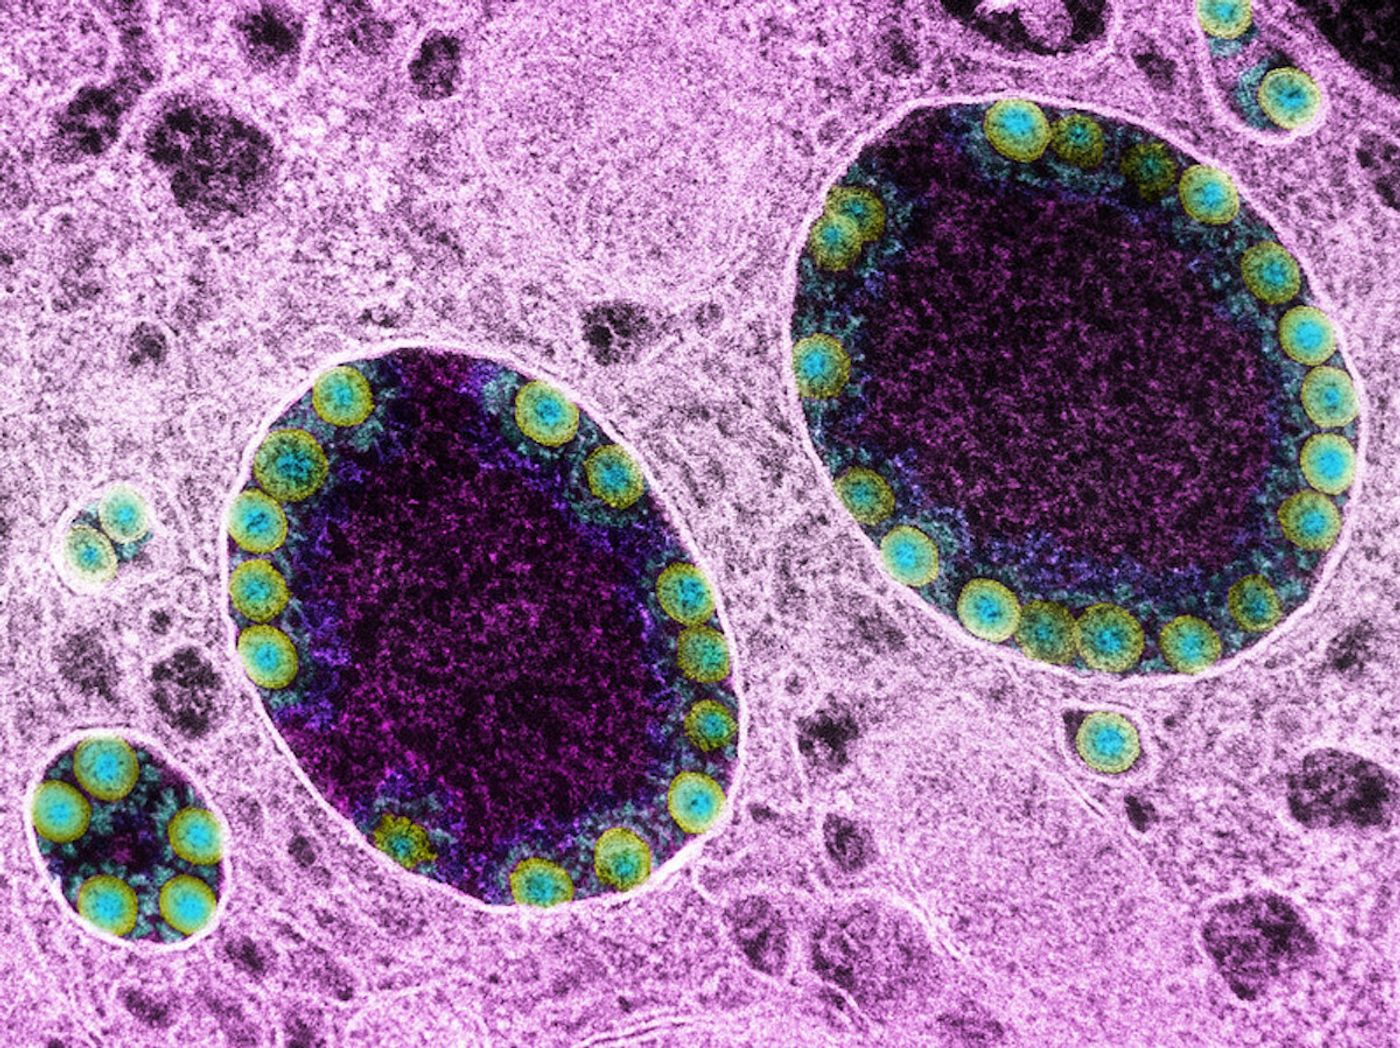 Transmission electron micrograph of SARS-CoV-2 virus particles (green) within endosomes of a heavily infected nasal Olfactory Epithelial Cell. Image captured at the NIAID Integrated Research Facility (IRF) in Fort Detrick, Maryland. / Credit: NIAID